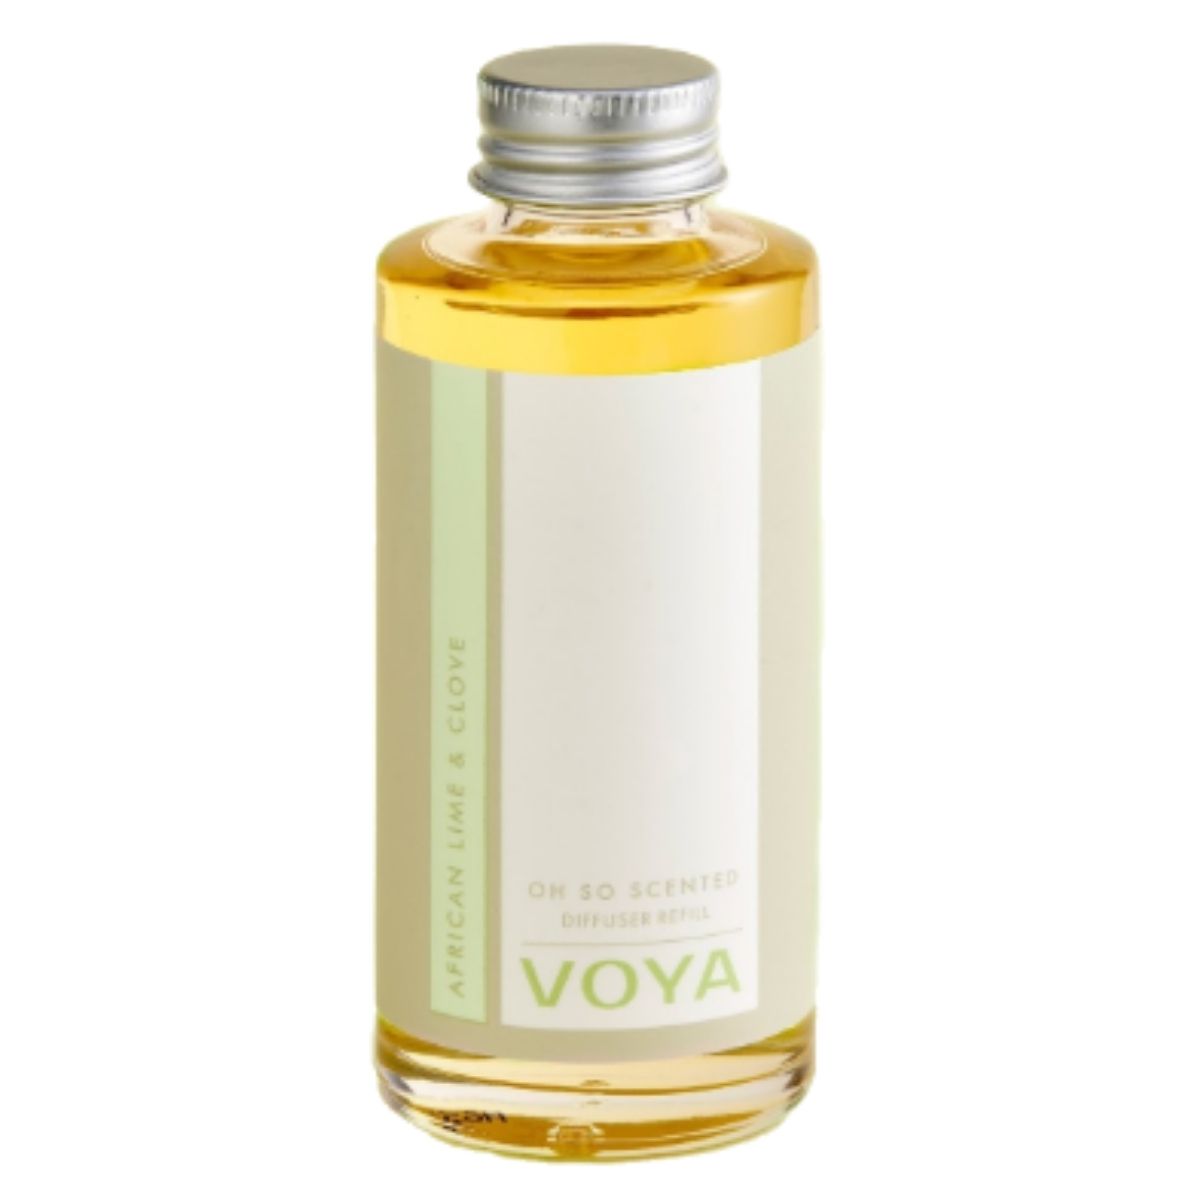 Voya Oh So Scented Diffuser Refill  - African Lime & Clove